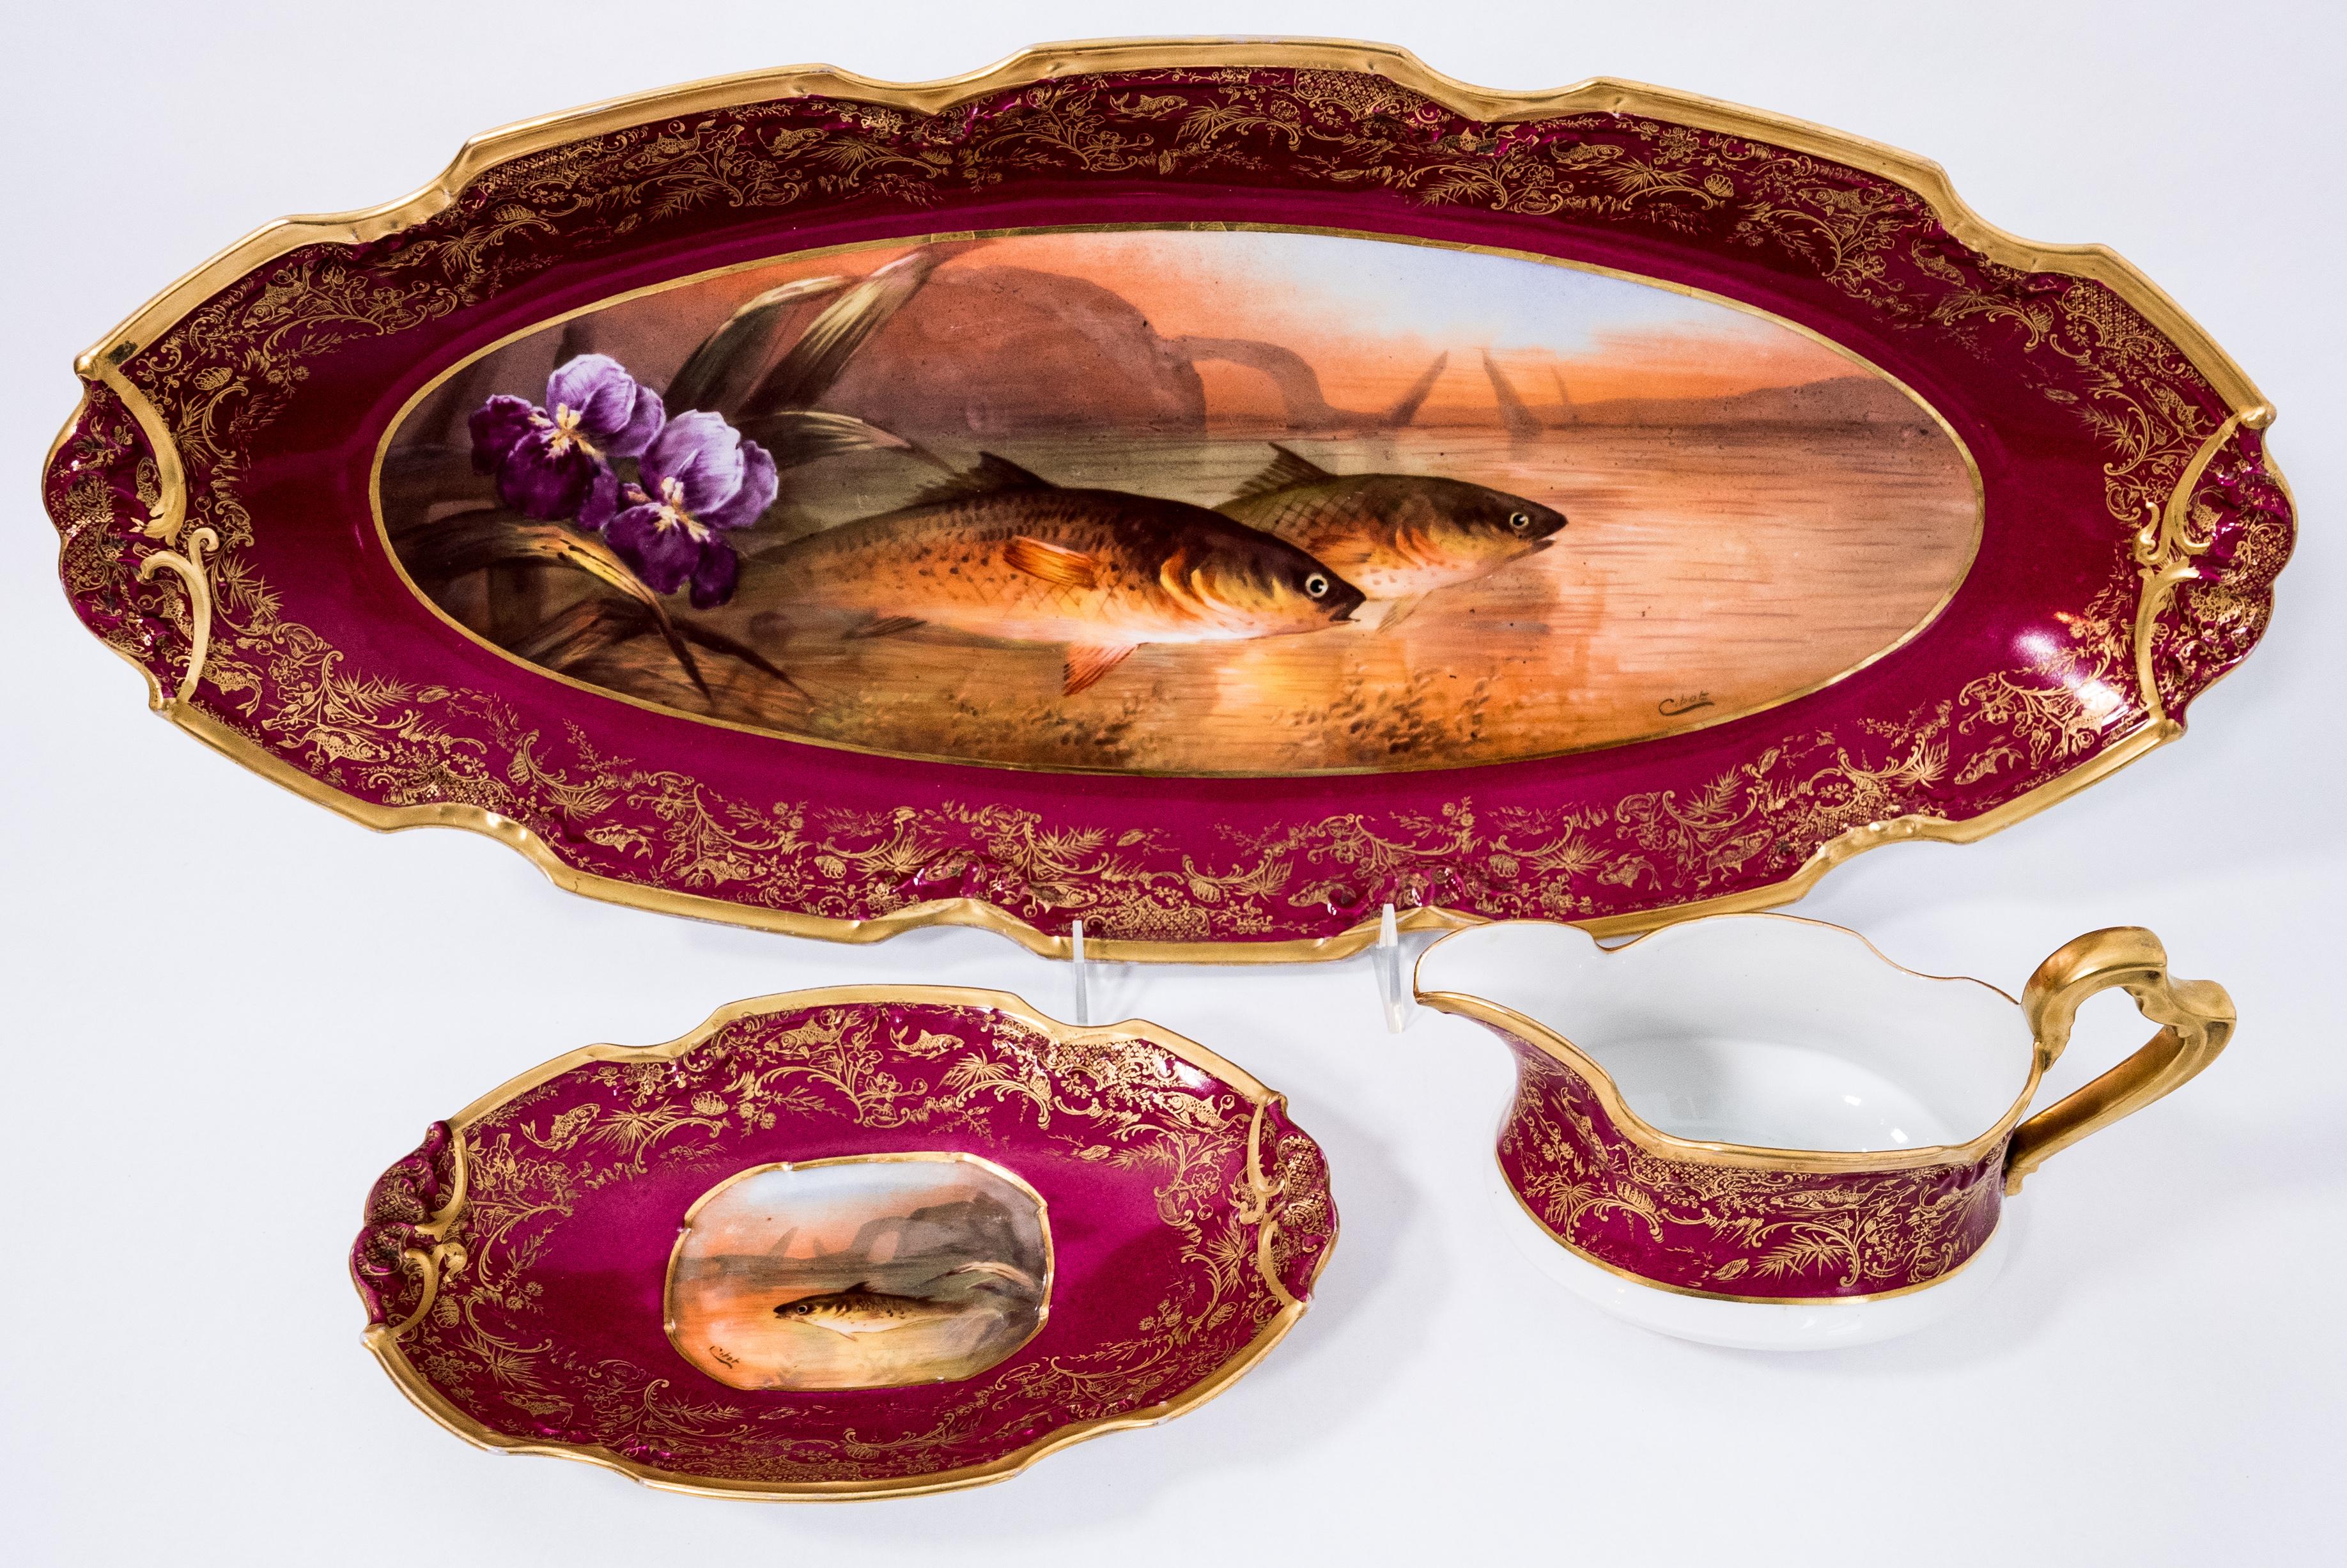 A great last quarter 19th century Limoges France fish service featuring rich ruby ground, a highly shaped form and hand painting. The pieces are artist signed and have beautiful orchid and full flora fauna backgrounds. We love the vibrant color of